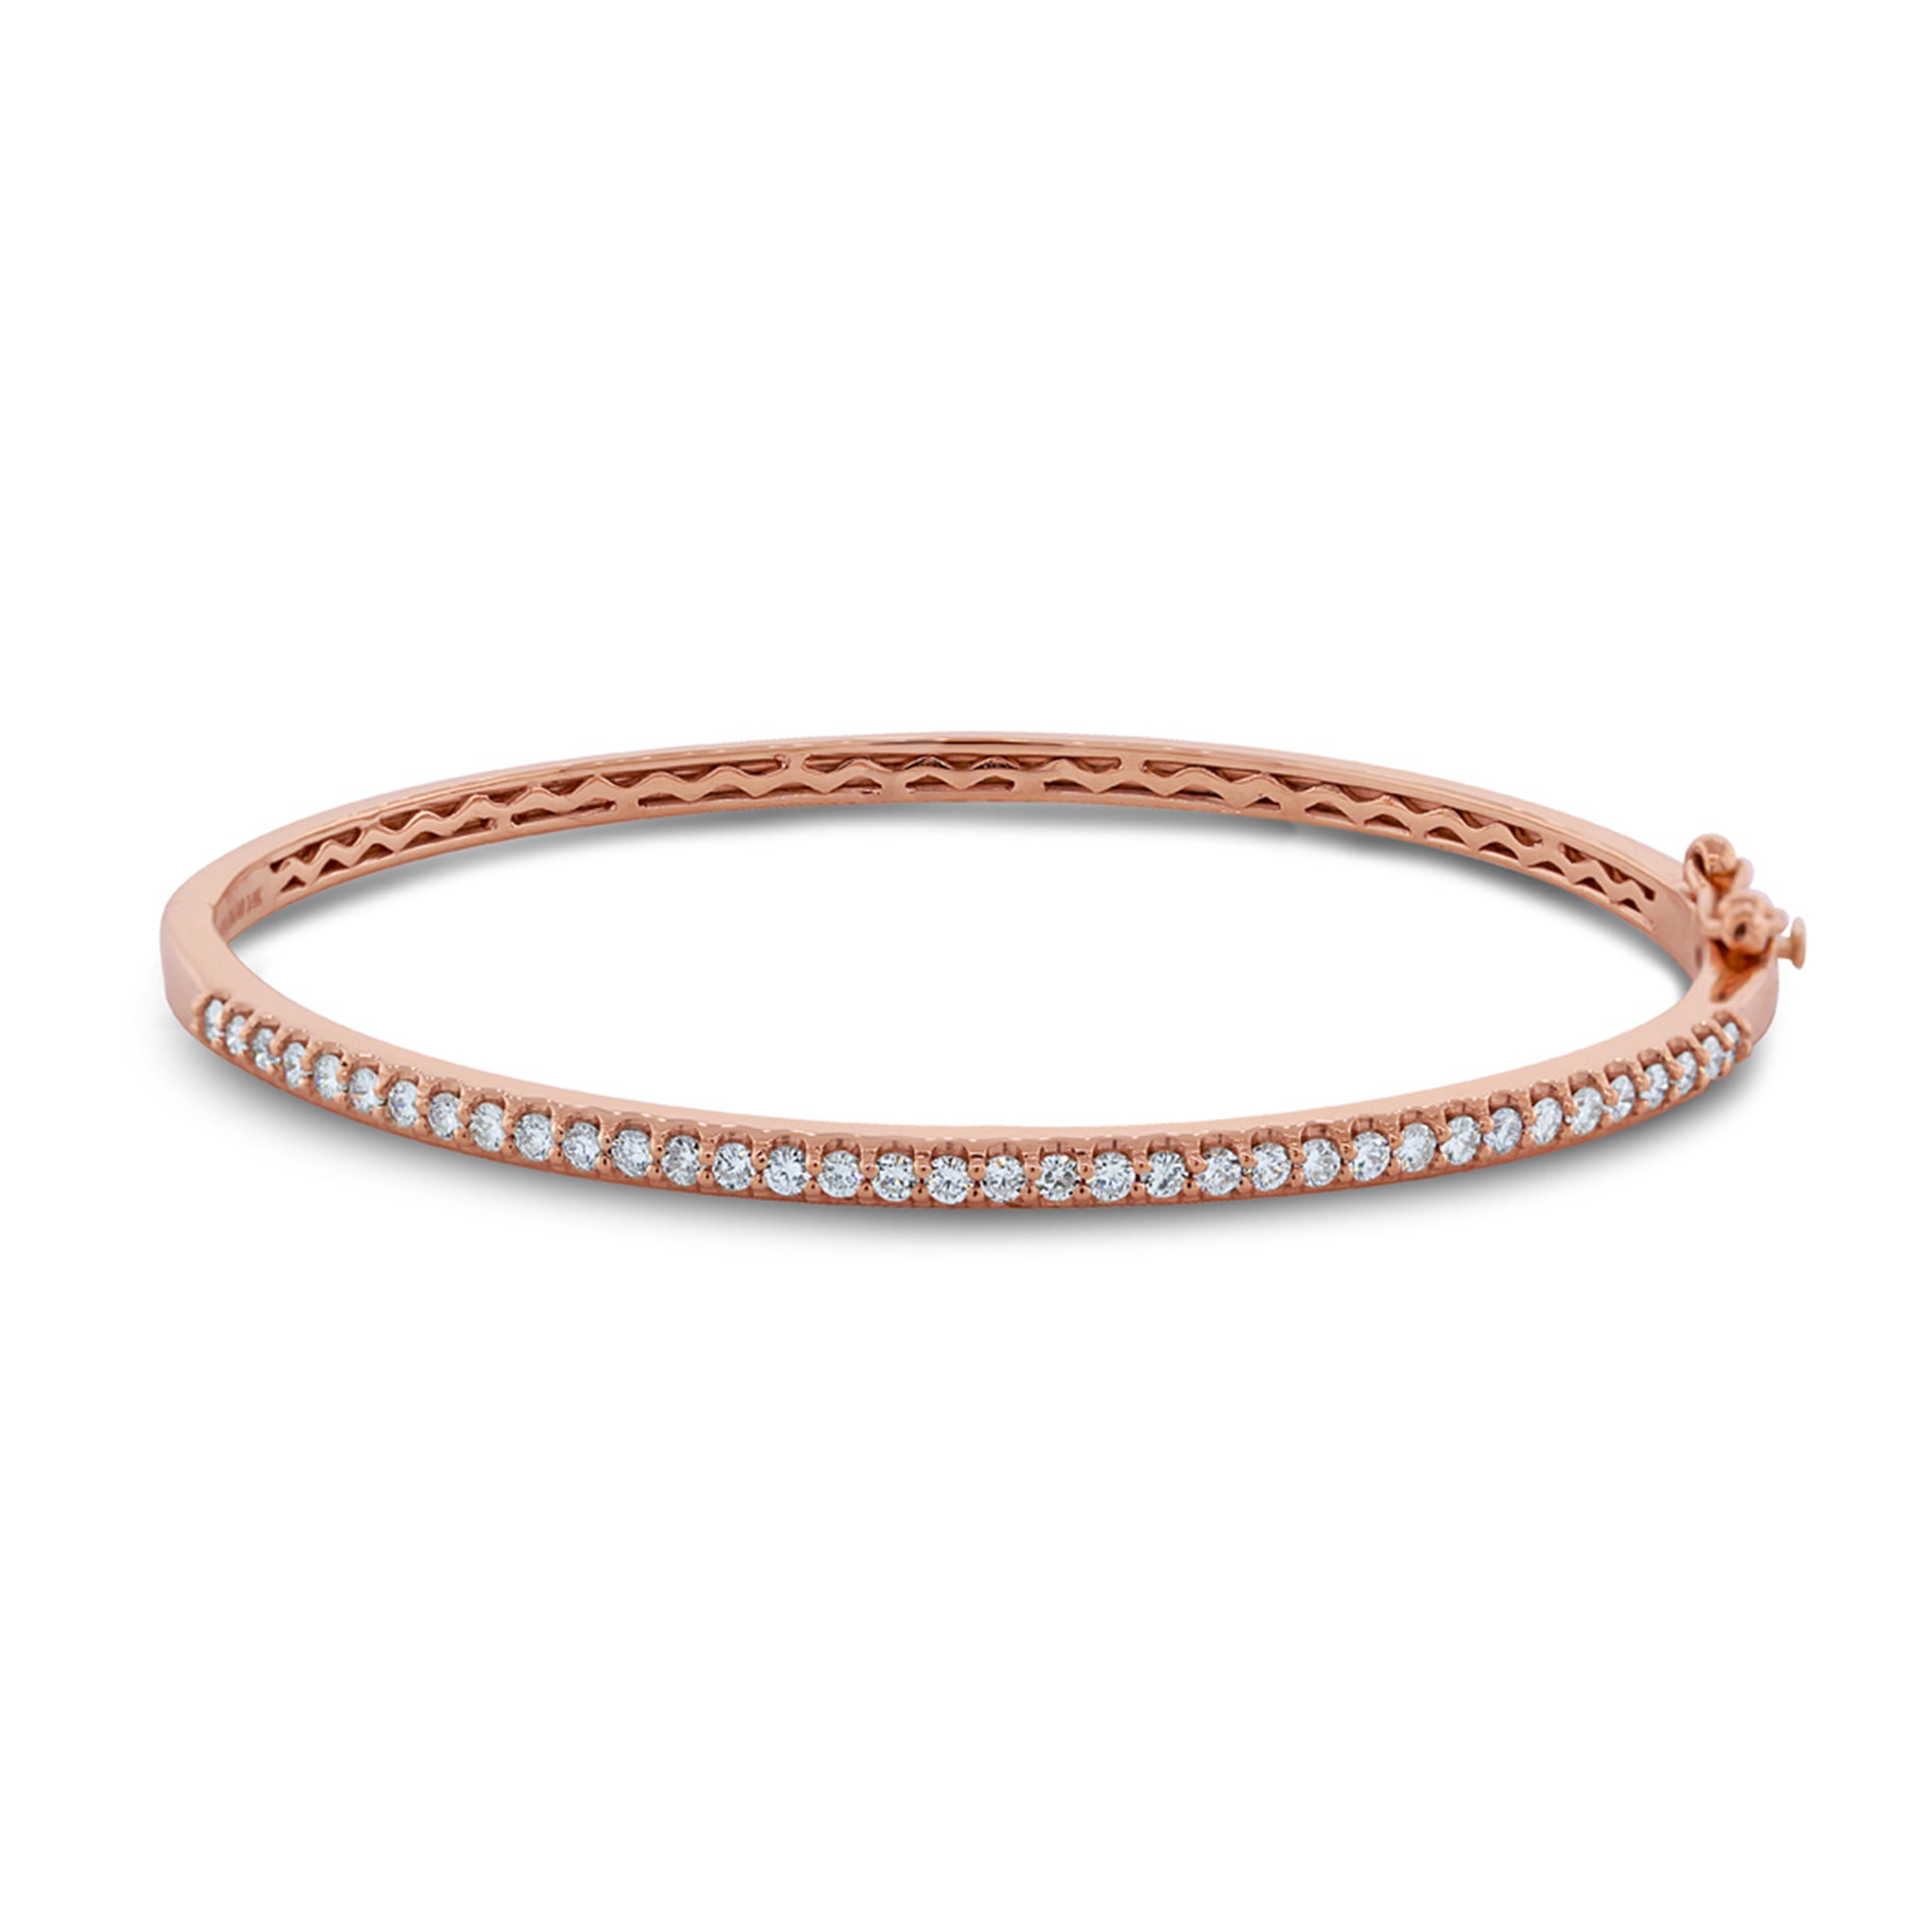 Diamond Bangle Bracelet in 14k Rose Gold, 1.03 Total Carat Weight - Talisman Collection Fine Jewelers